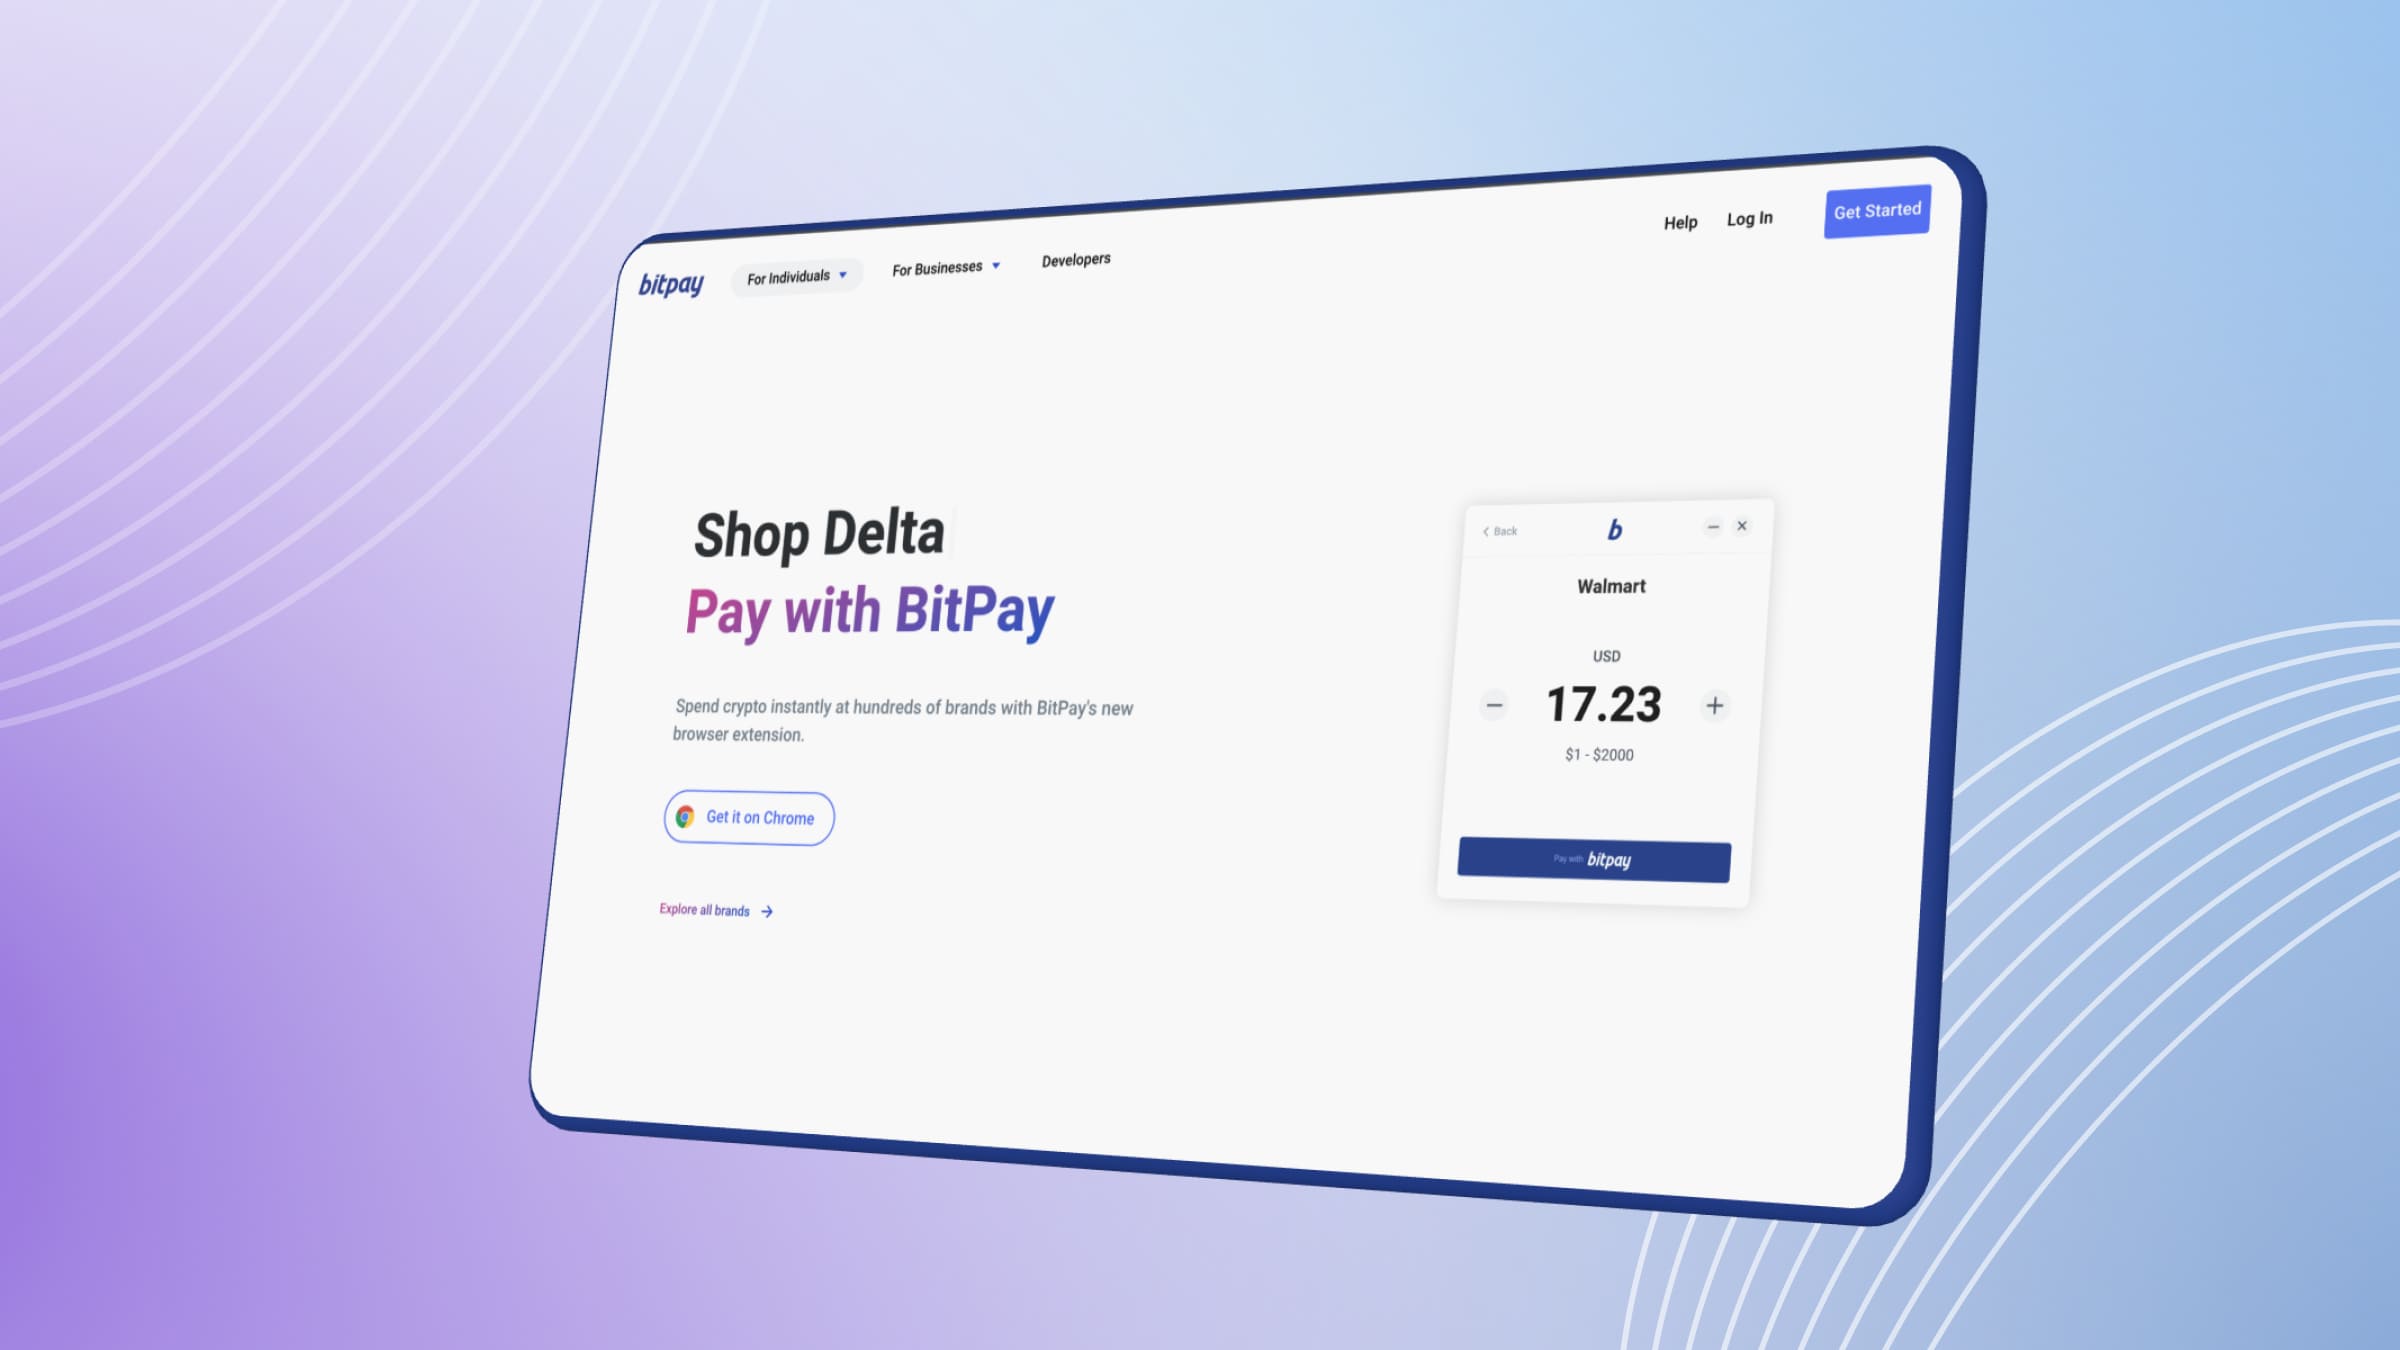 A browser extension from BitPay allows you to pay with cryptocurrency for purchases on many brands' websites.